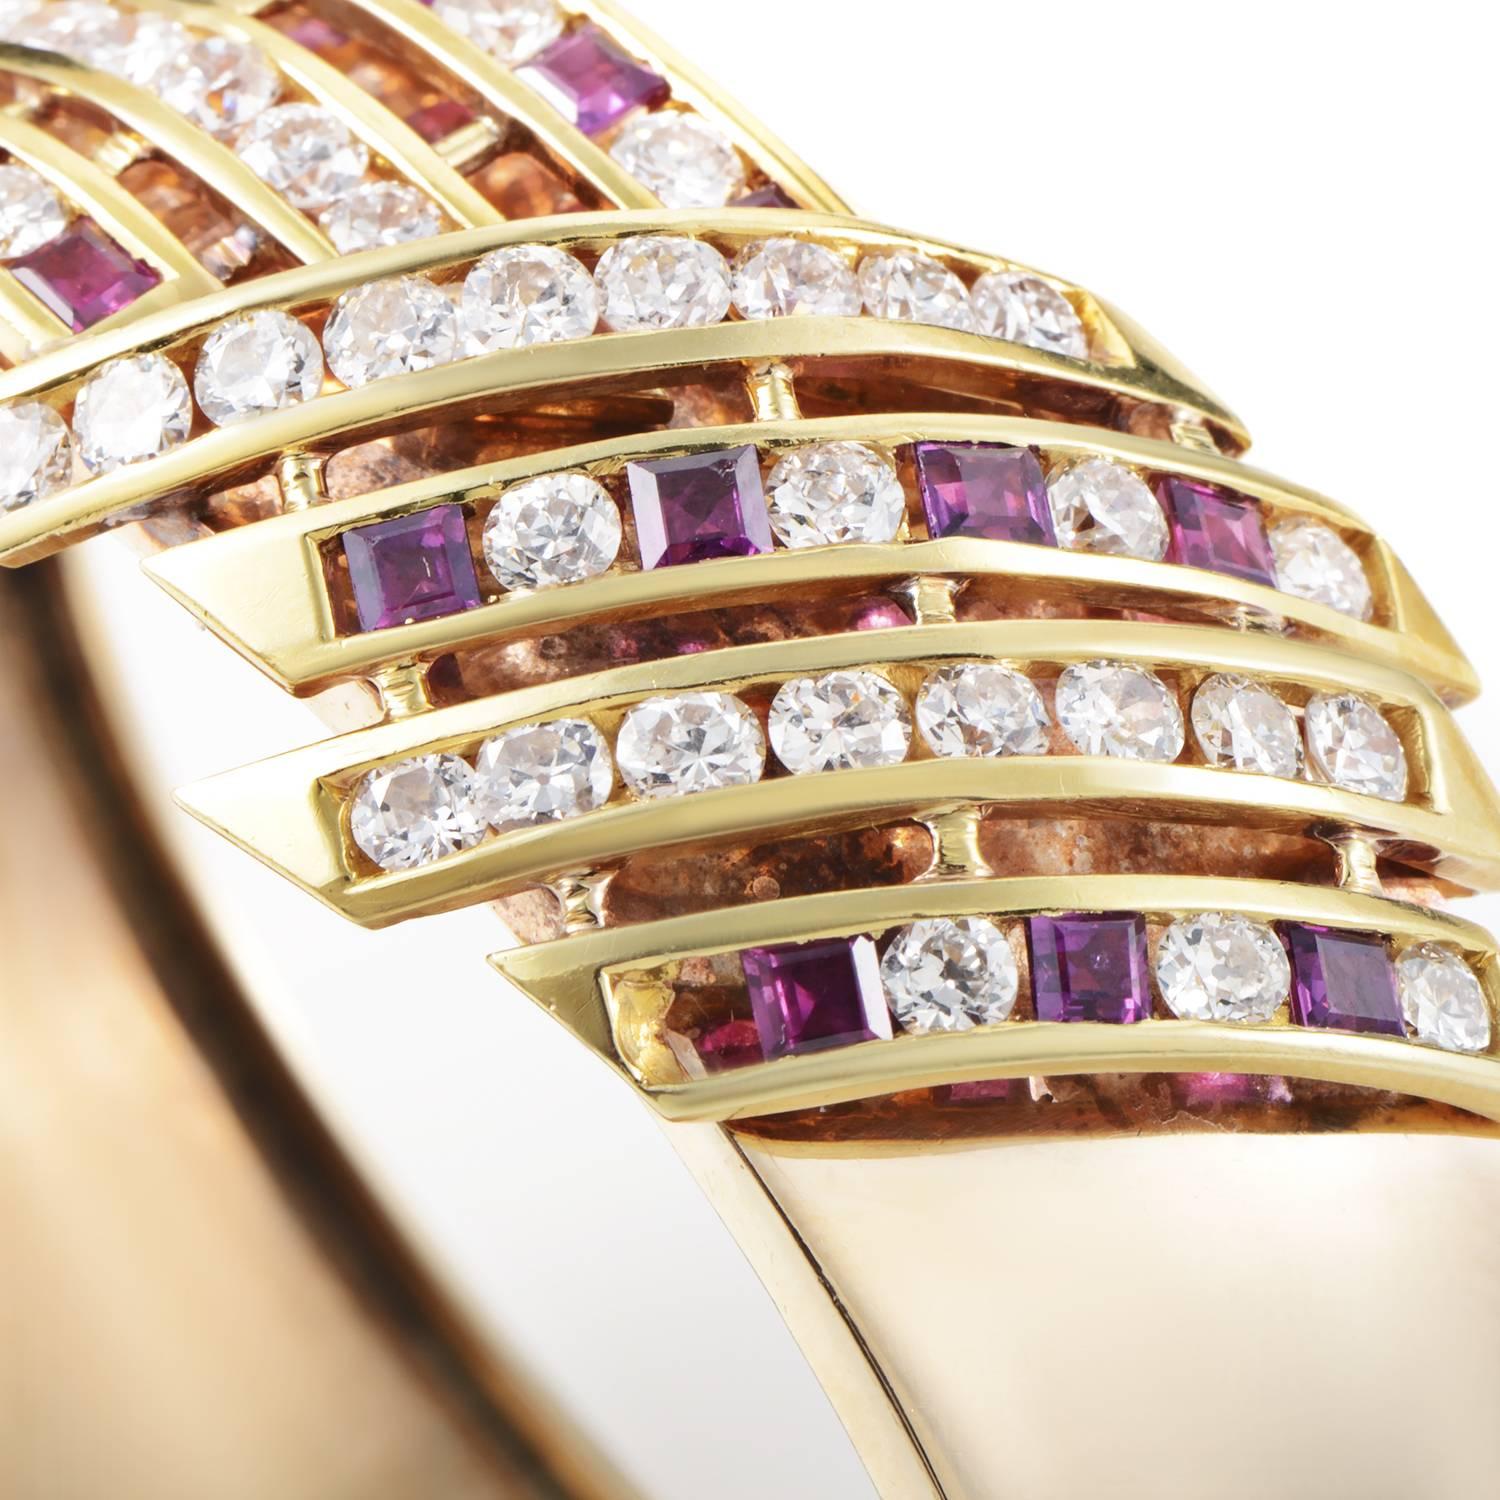 The unblemished gleam and ideally smooth curve of 14K yellow gold is broken by a glamorous decoration in the form of gorgeous rubies weighing in total 2.90 carats and lustrous diamonds totaling approximately 4.75 carats in this outstanding and